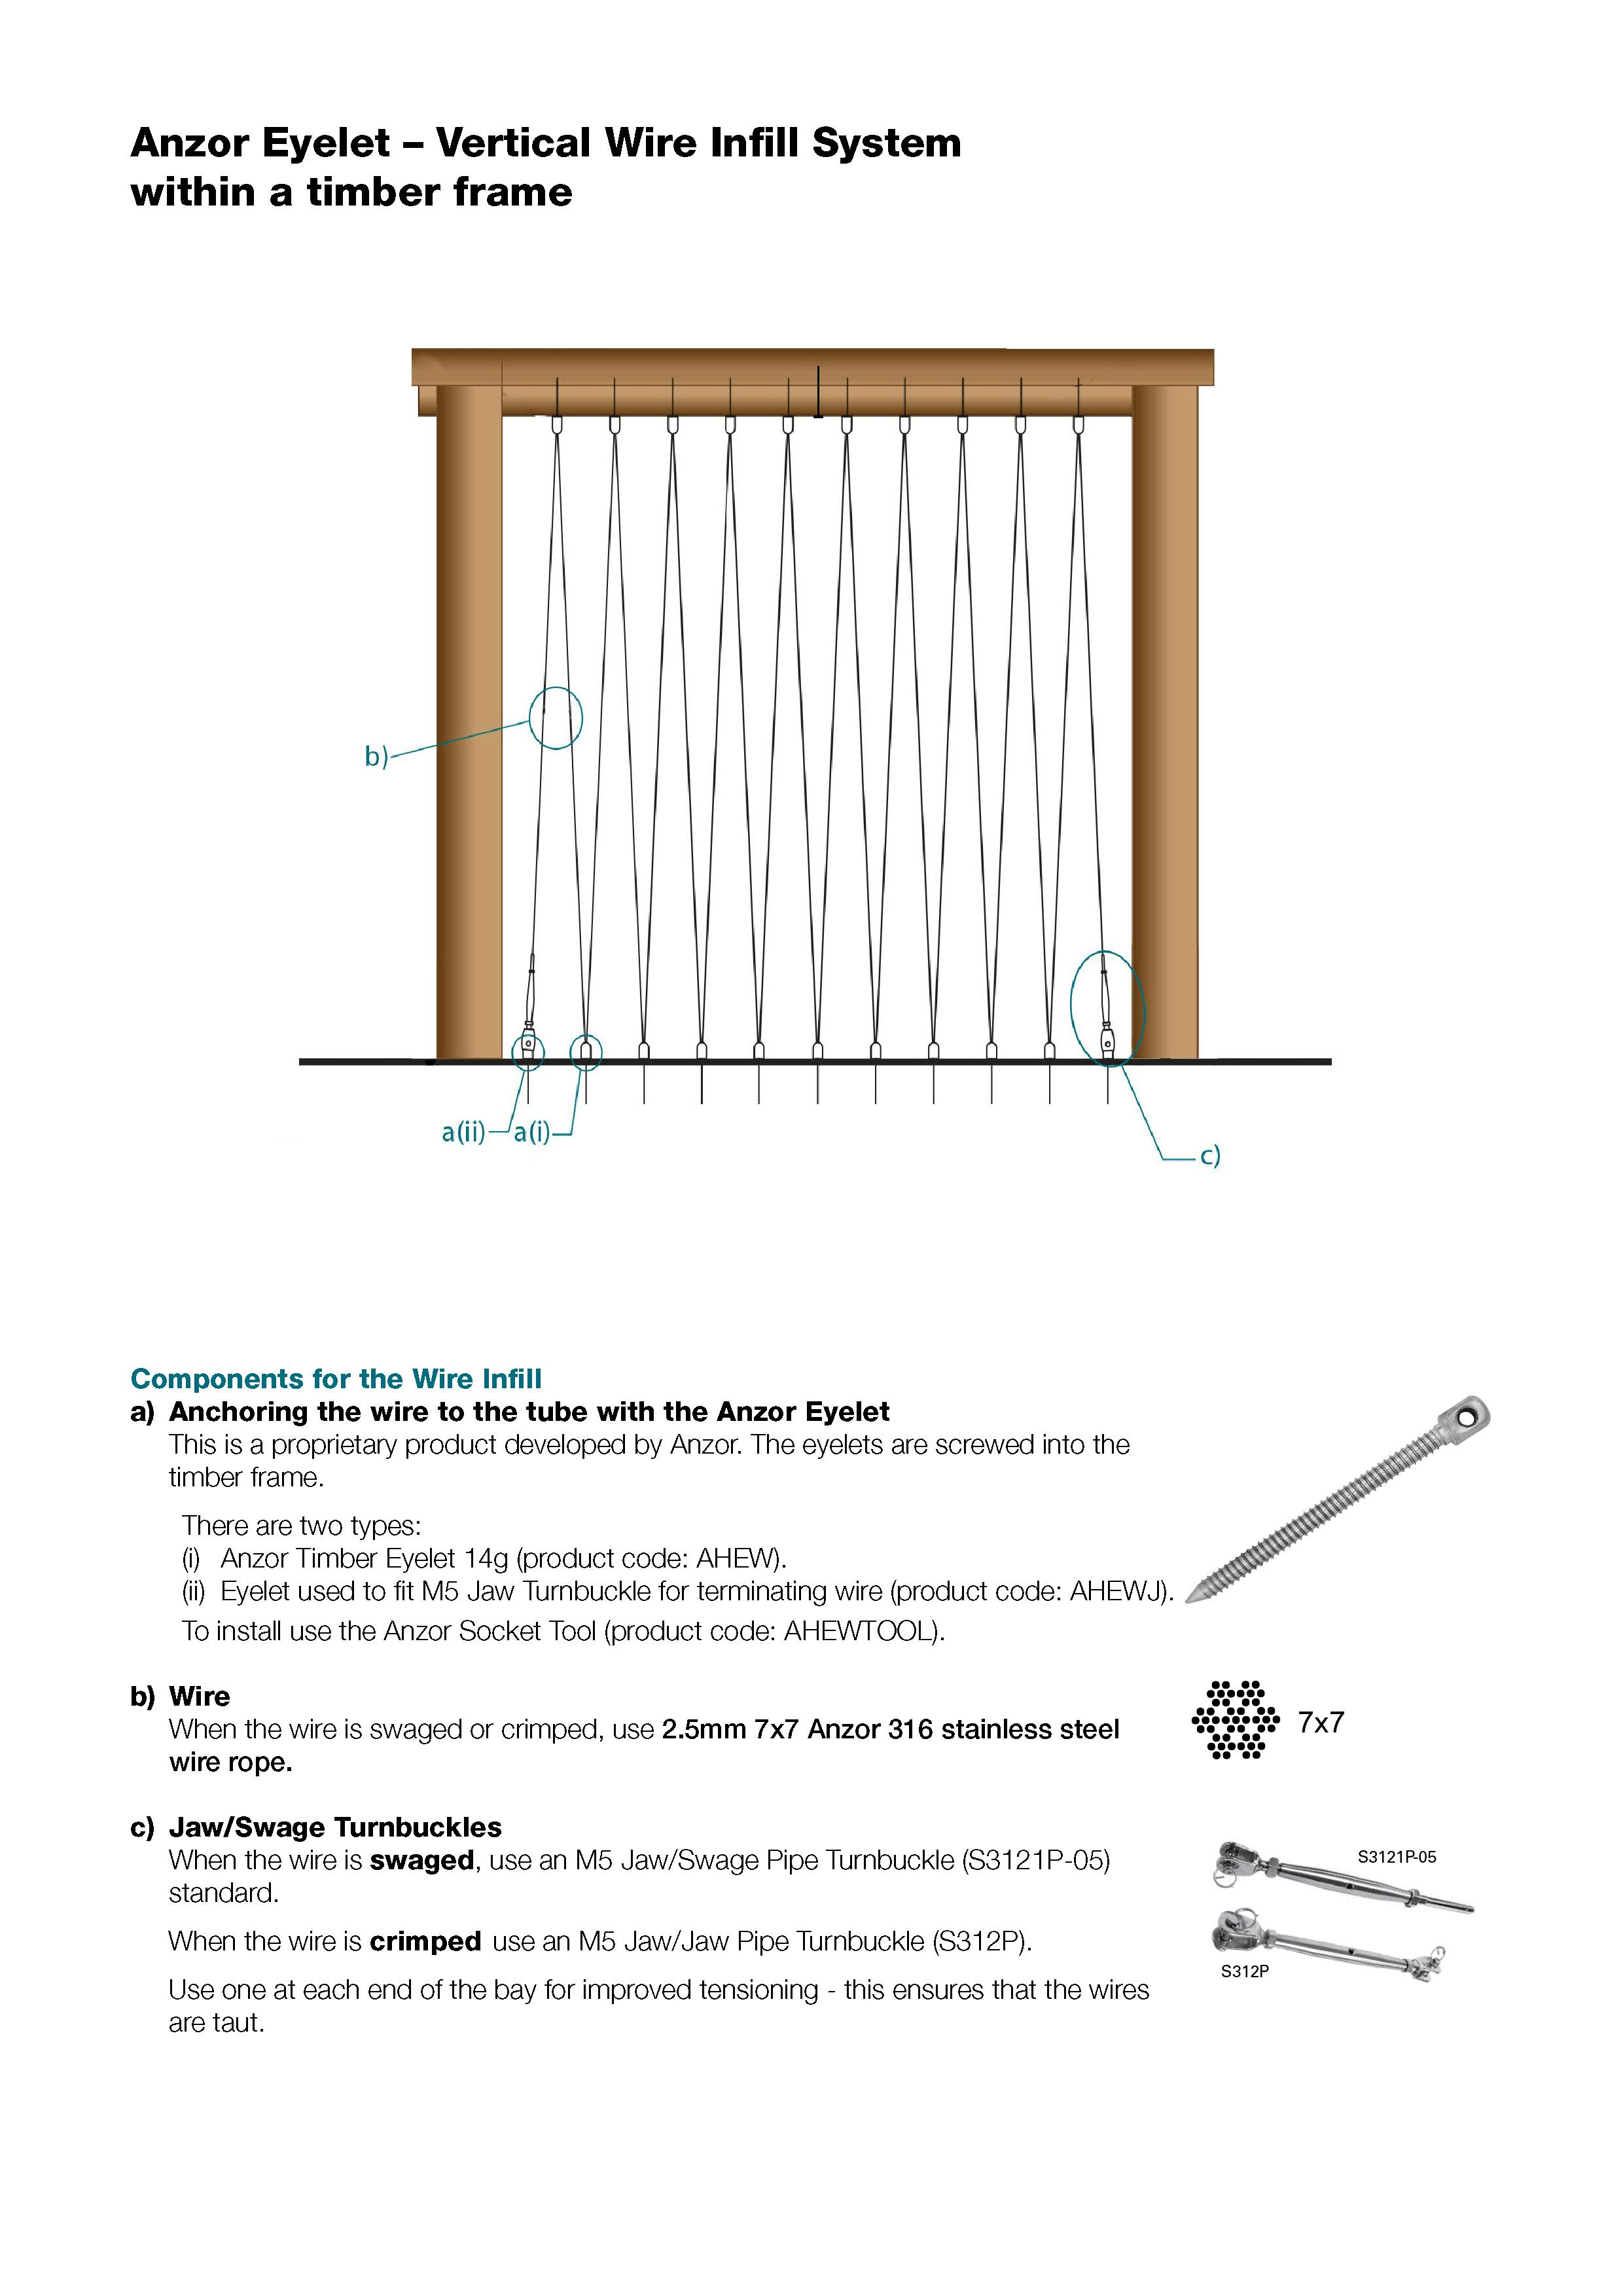 Stainless Vertical Wire Infill System for Timber Frame